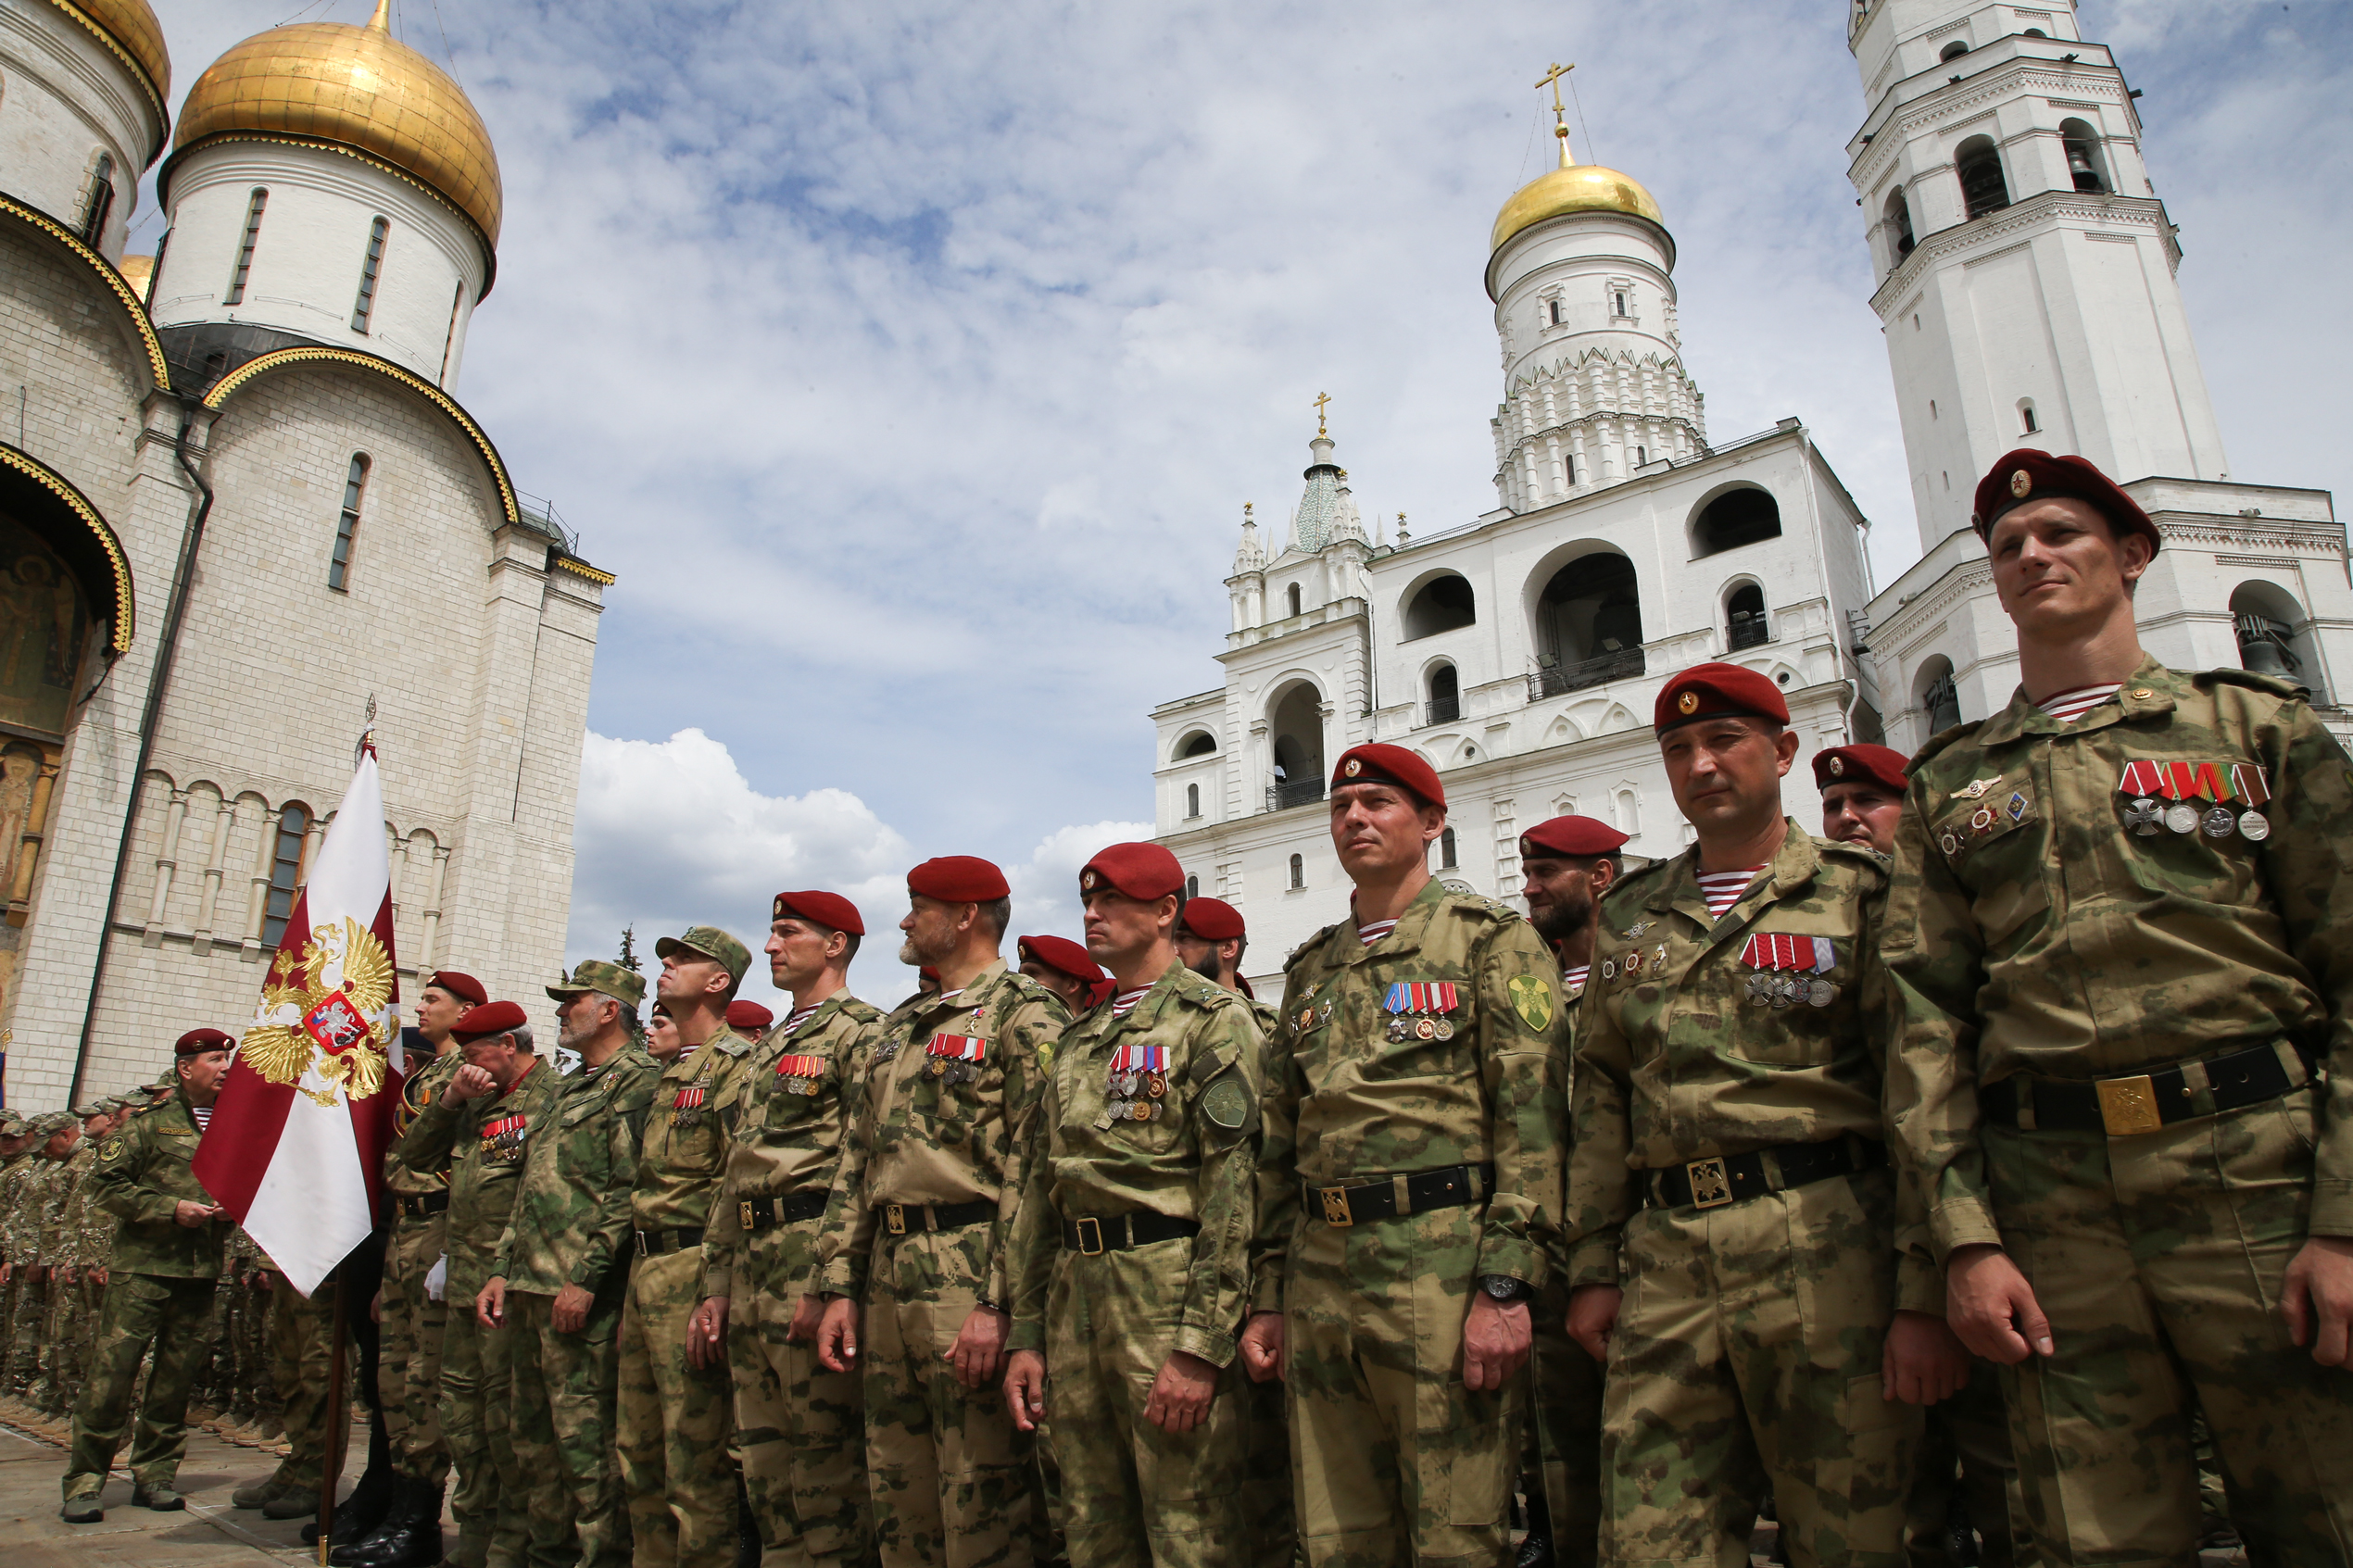 Russia loses 4,430 service members as Putin deals with mutiny fallout